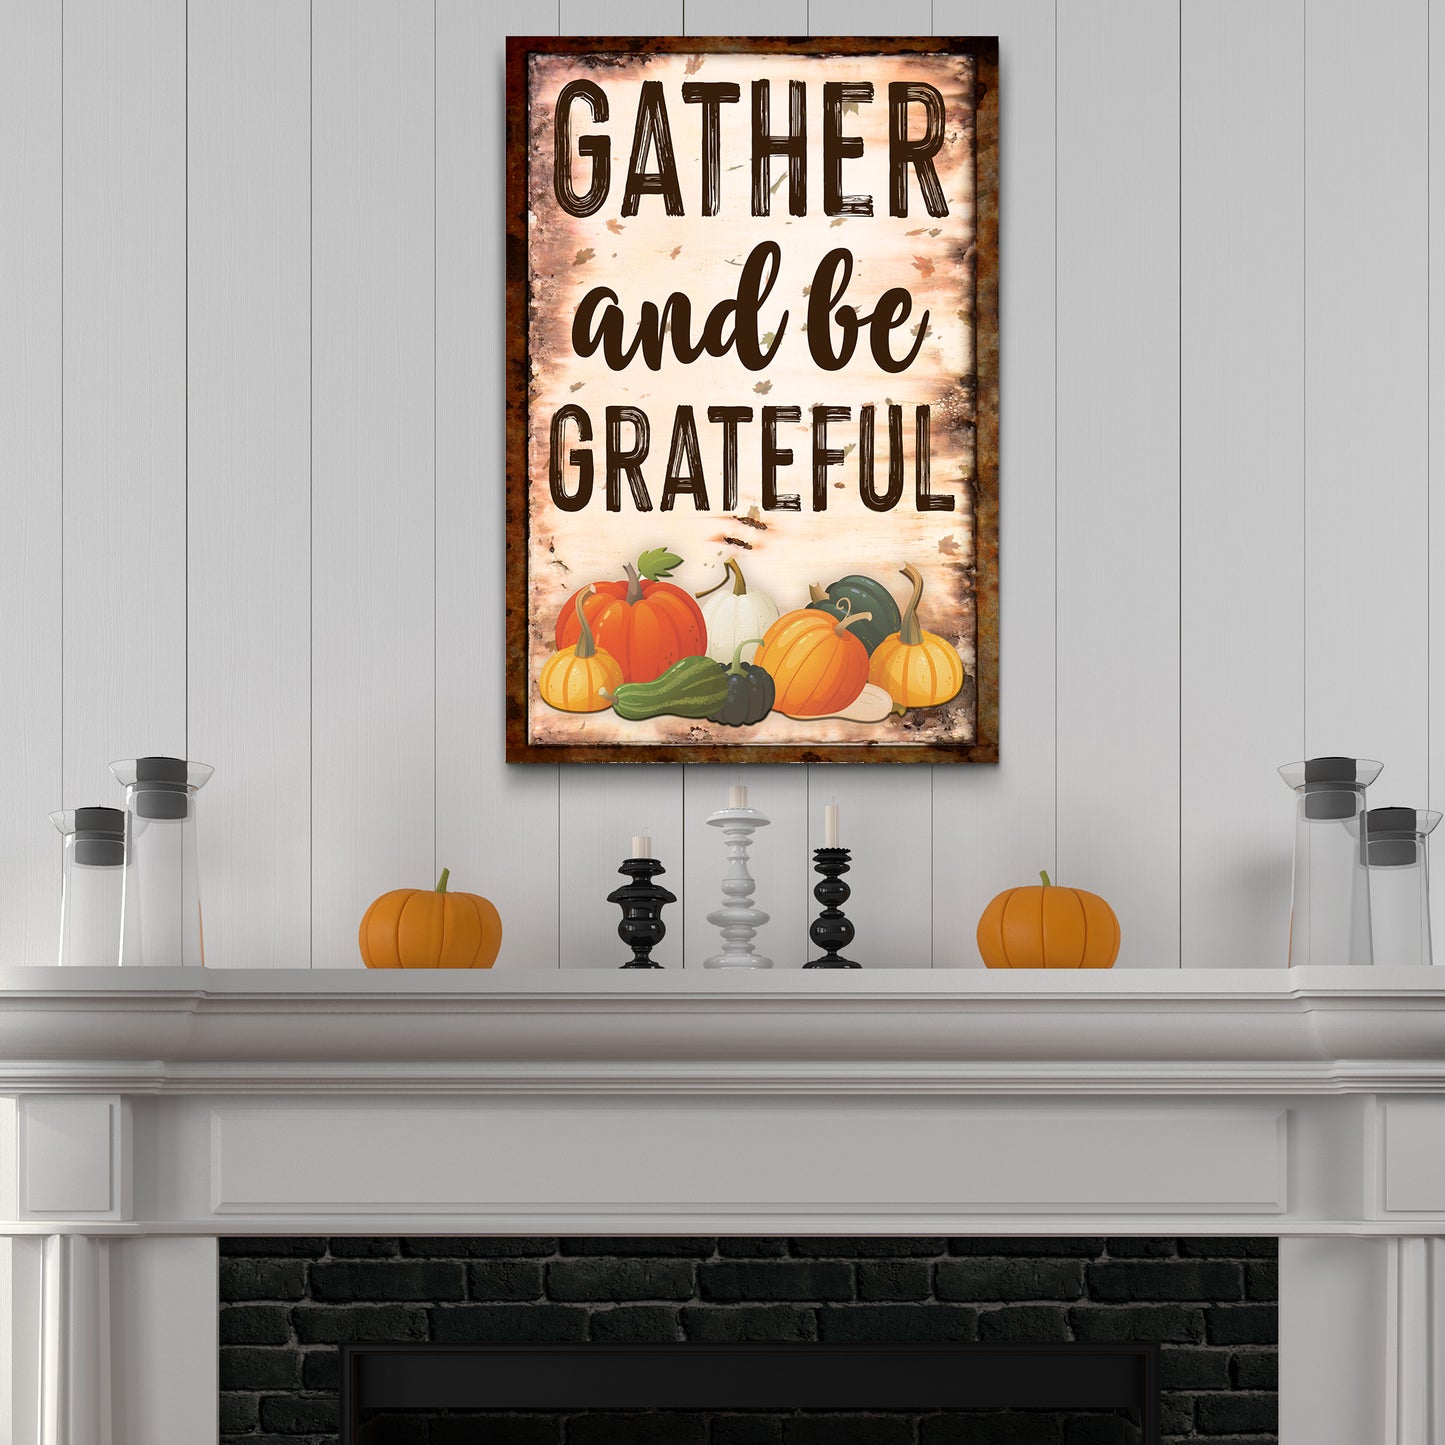 Gather And Be Grateful Sign Style 2 - Image by Tailored Canvases